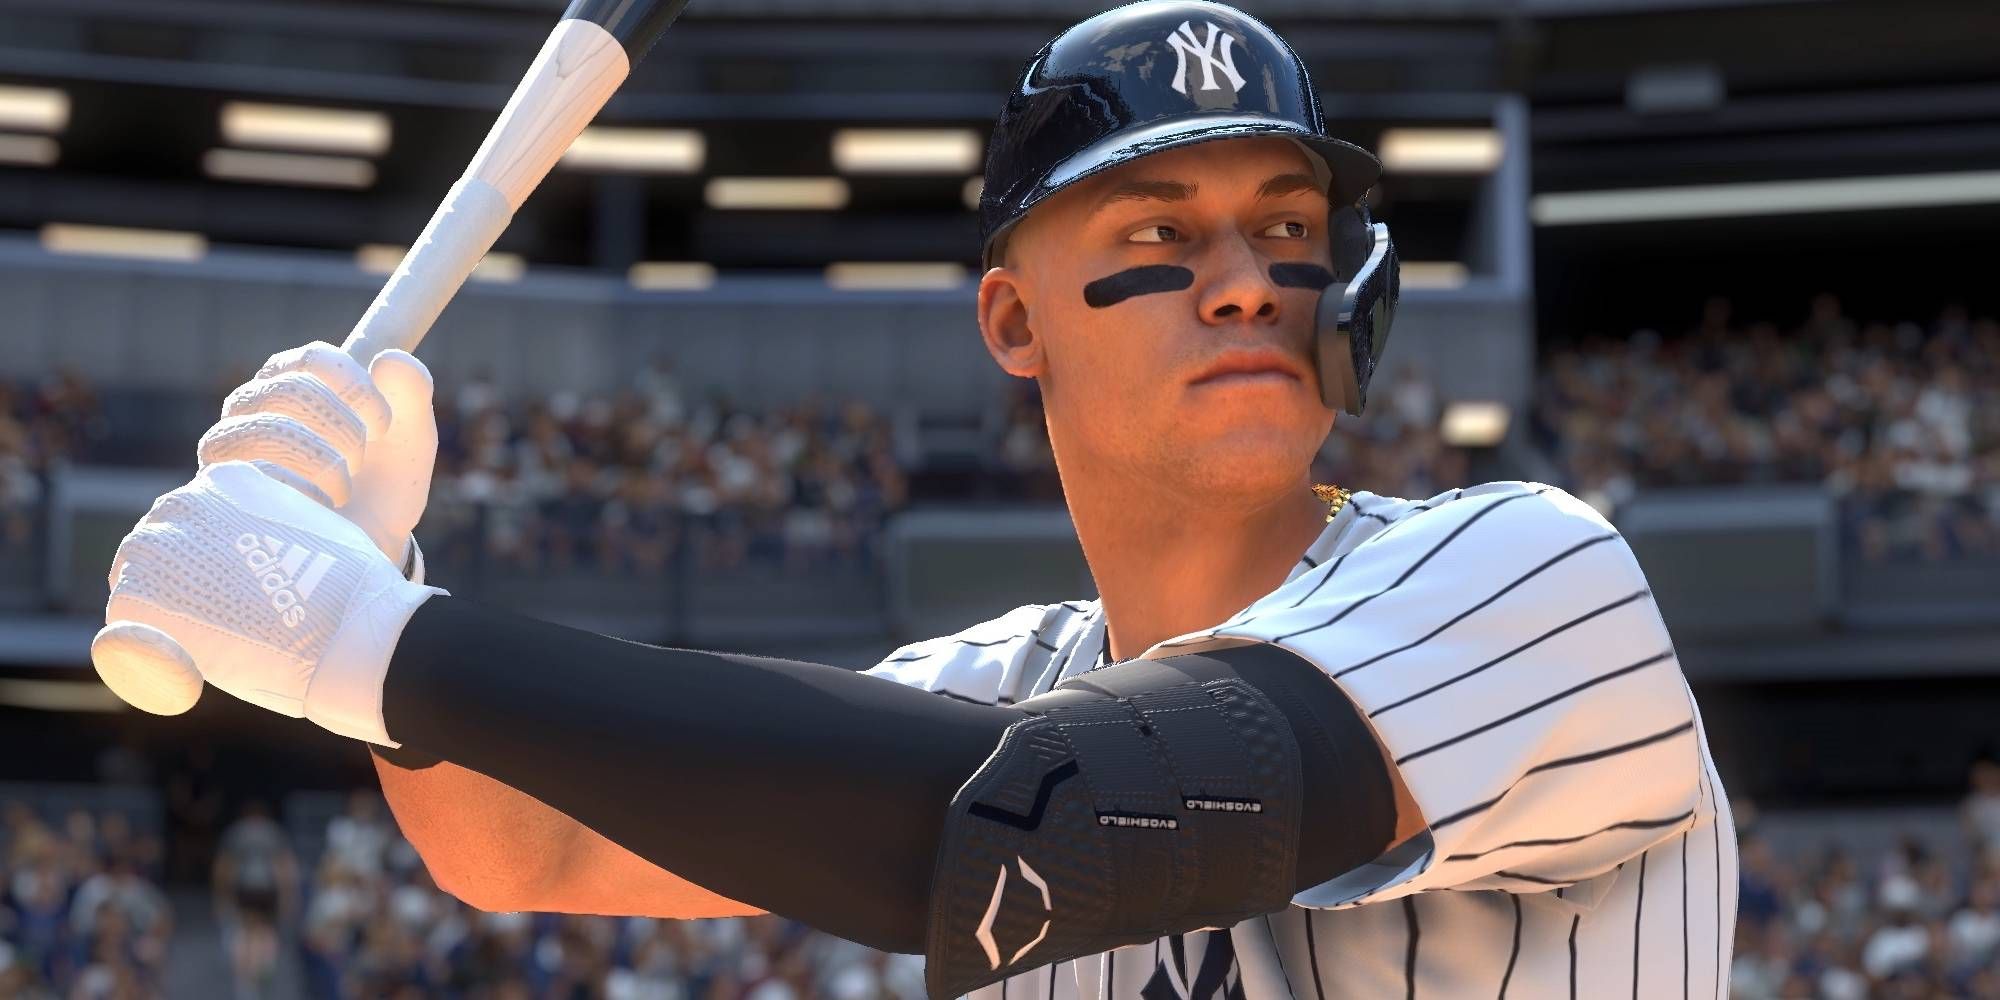 MLB The Show 23 Aaron Judge Right Fielder At the Bat for New York Yankees